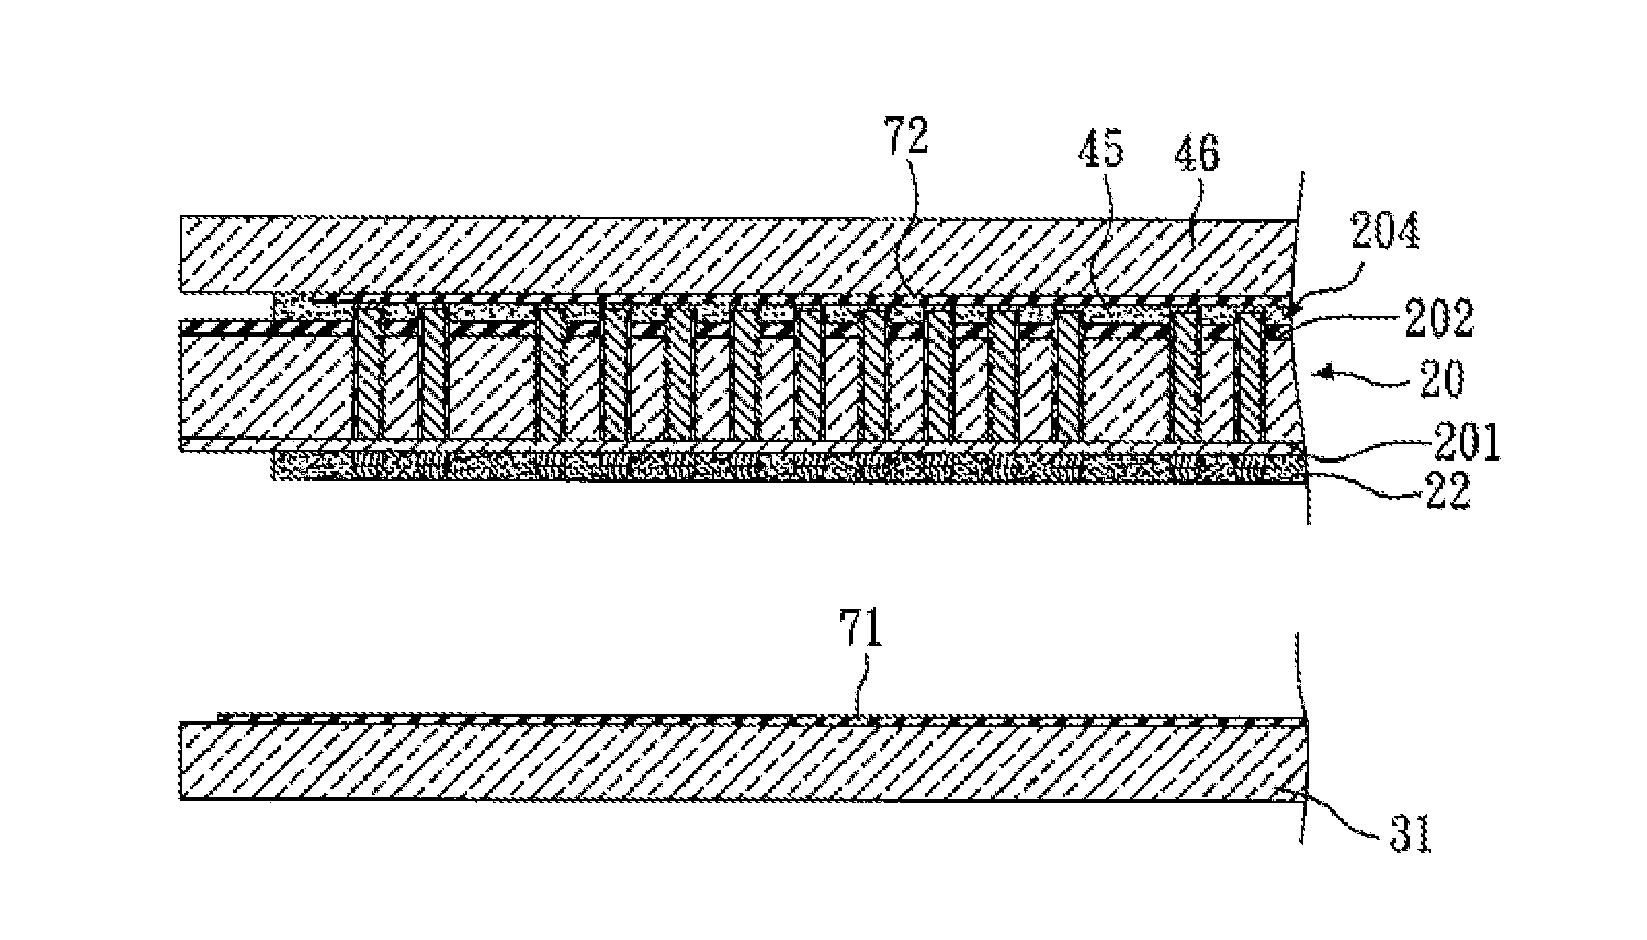 Carrier bonding and detaching processes for a semiconductor wafer